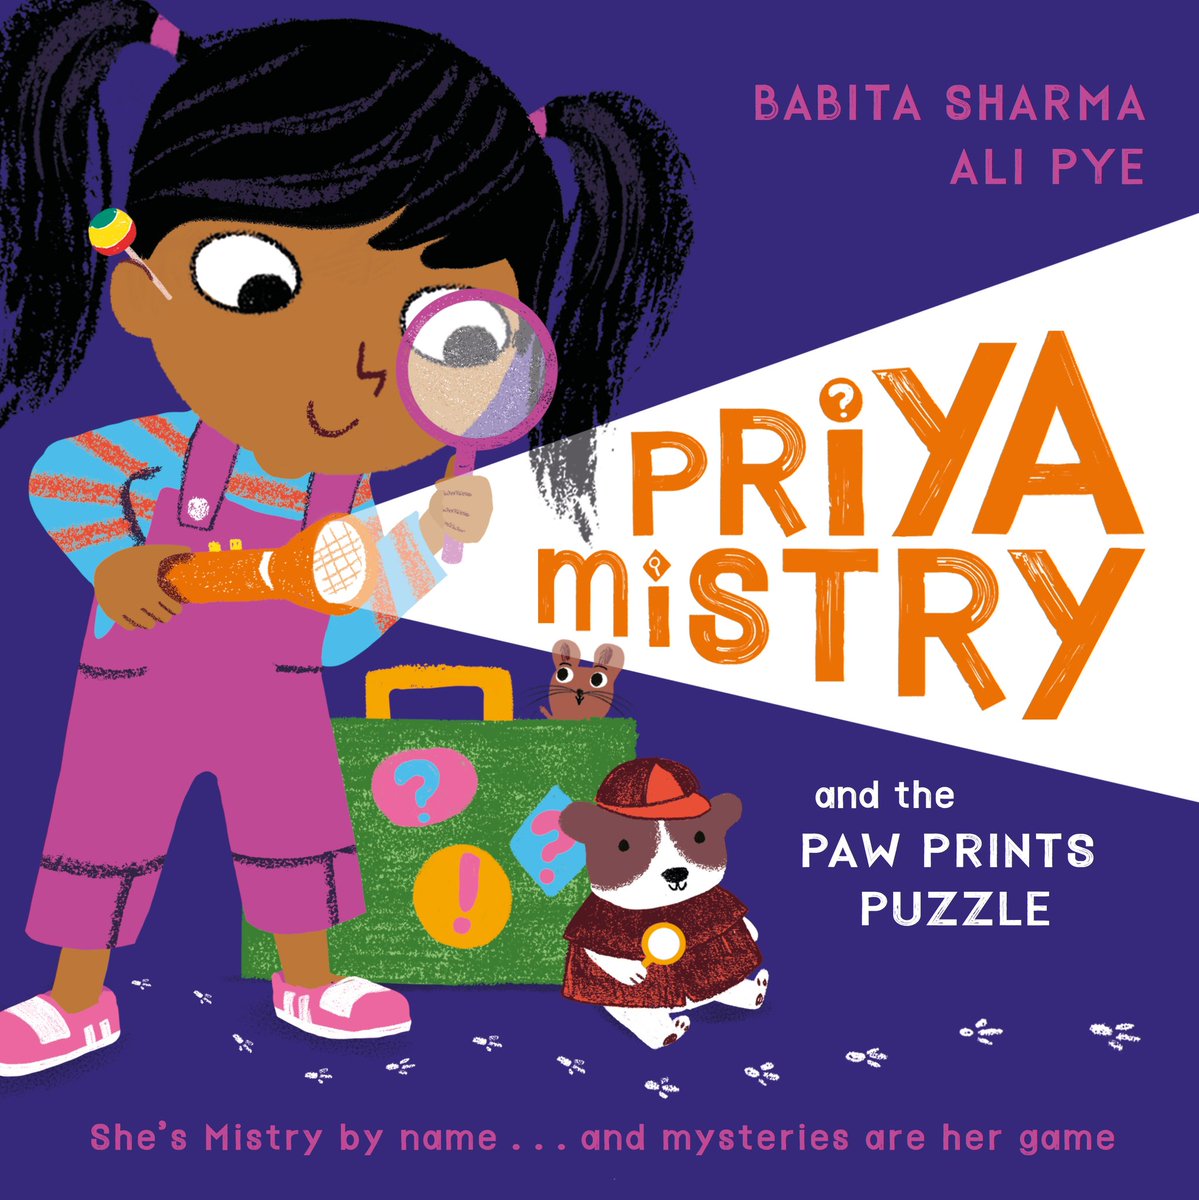 On @BBCRadioLondon in few minutes talking about my new children’s book series with @alpapatel 📻 🎙️ ‘Priya Mistry and the Paw Prints Puzzle’ OUT NOW shorturl.at/ySW68 📚